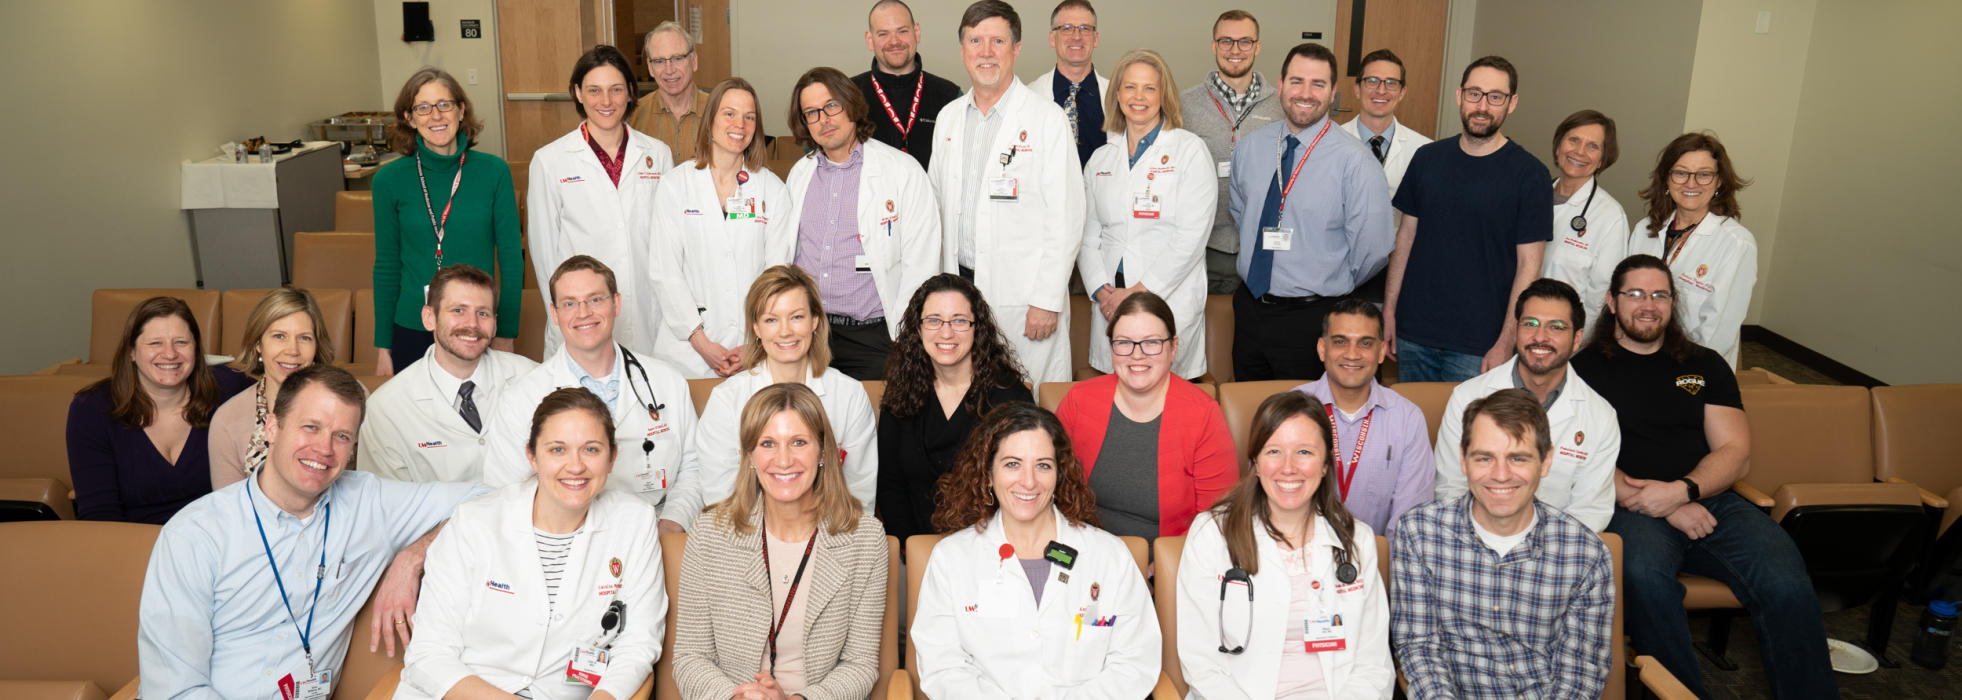 Indoor group photo of Hospital Medicine faculty